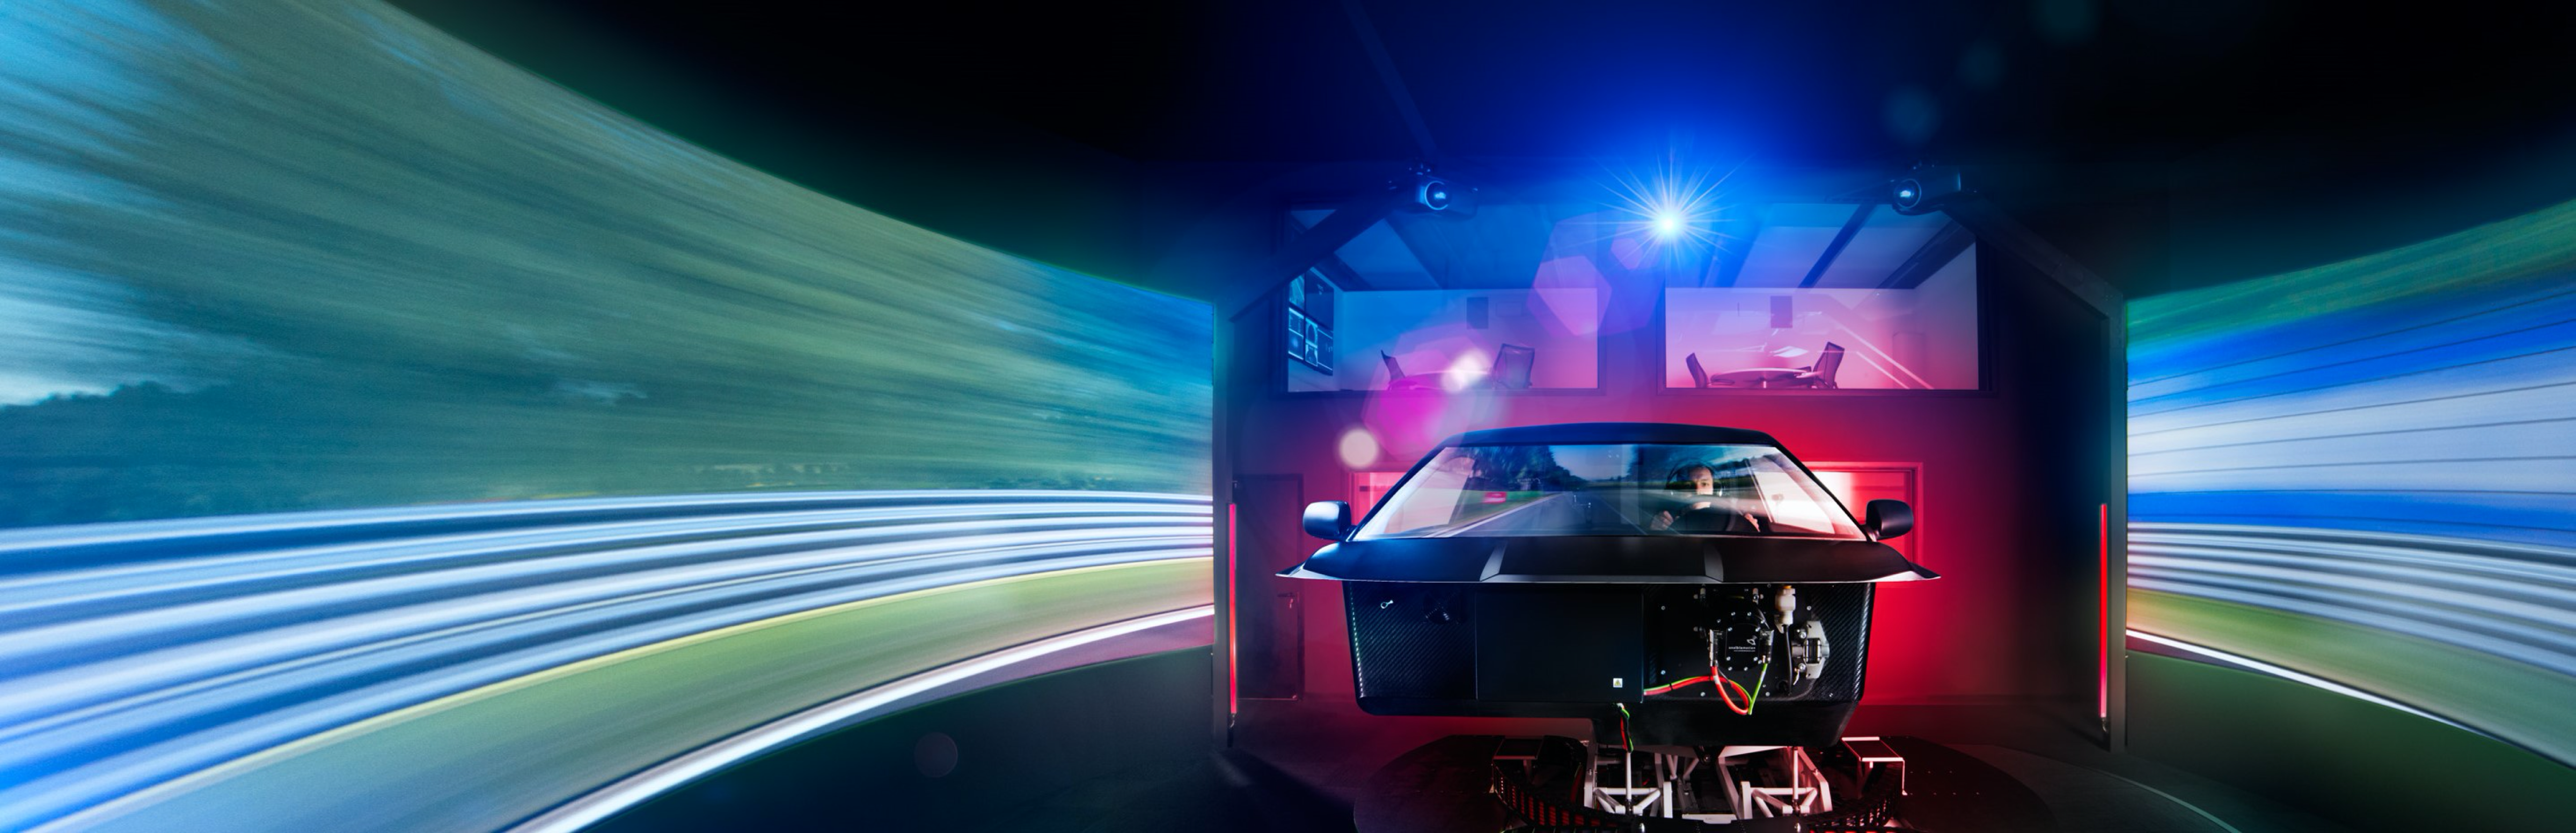 Upgrade To A New Ansible Motion Driving Simulator Enables More Efficient And Accurate Testing In The Virtual World For Premium Global Vehicle Manufacturer